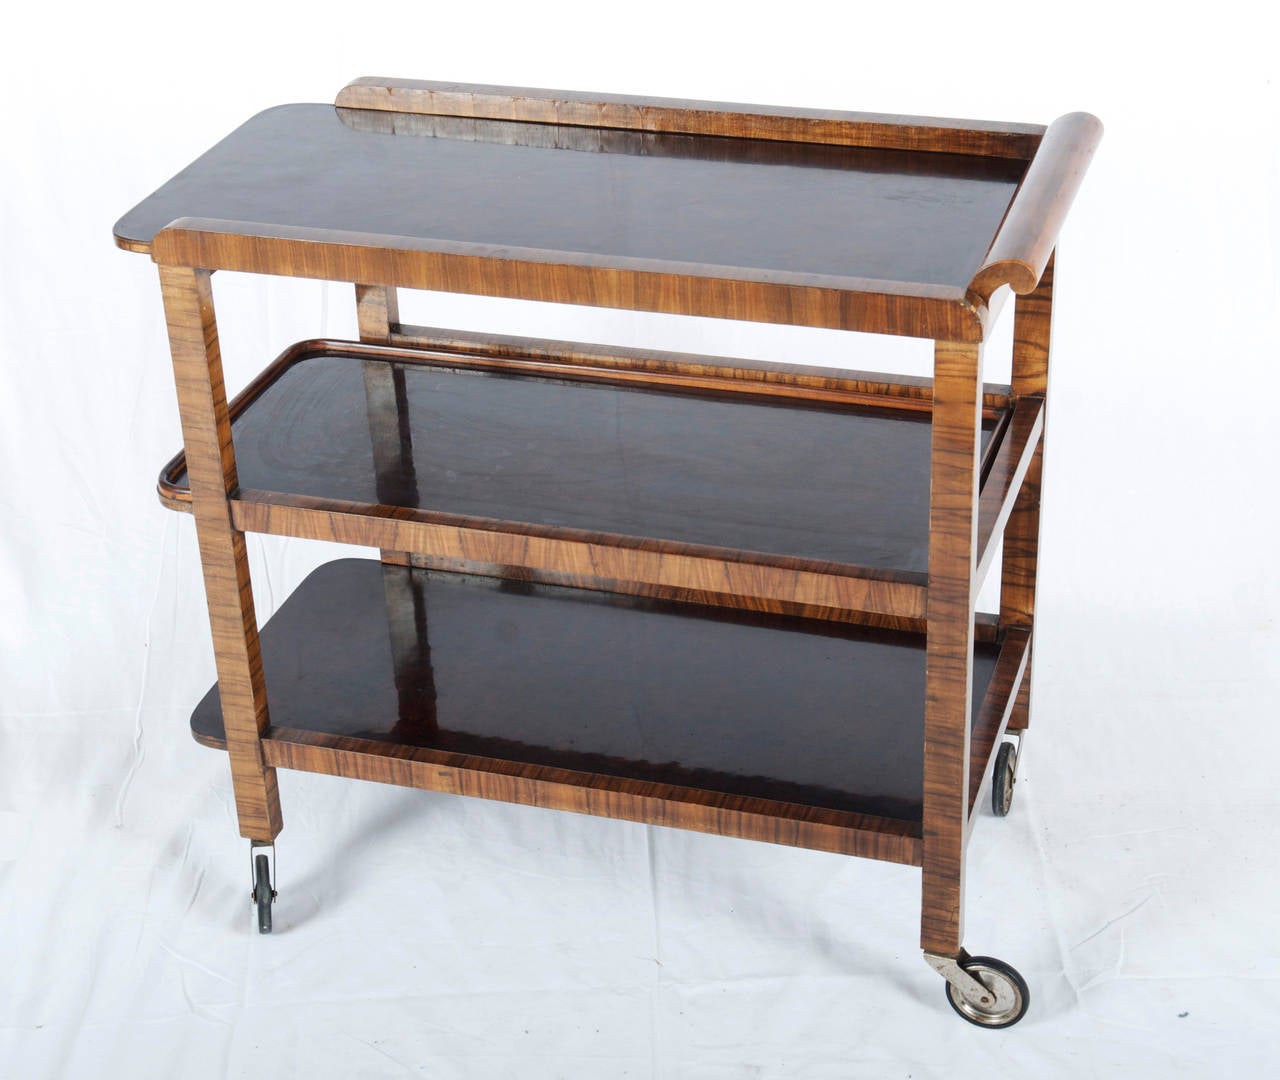 Art deco Thonet serving cart, trolley, bar in original condition.
Frame is made of soft wood with walnut veneer, trays with bakelite surface.